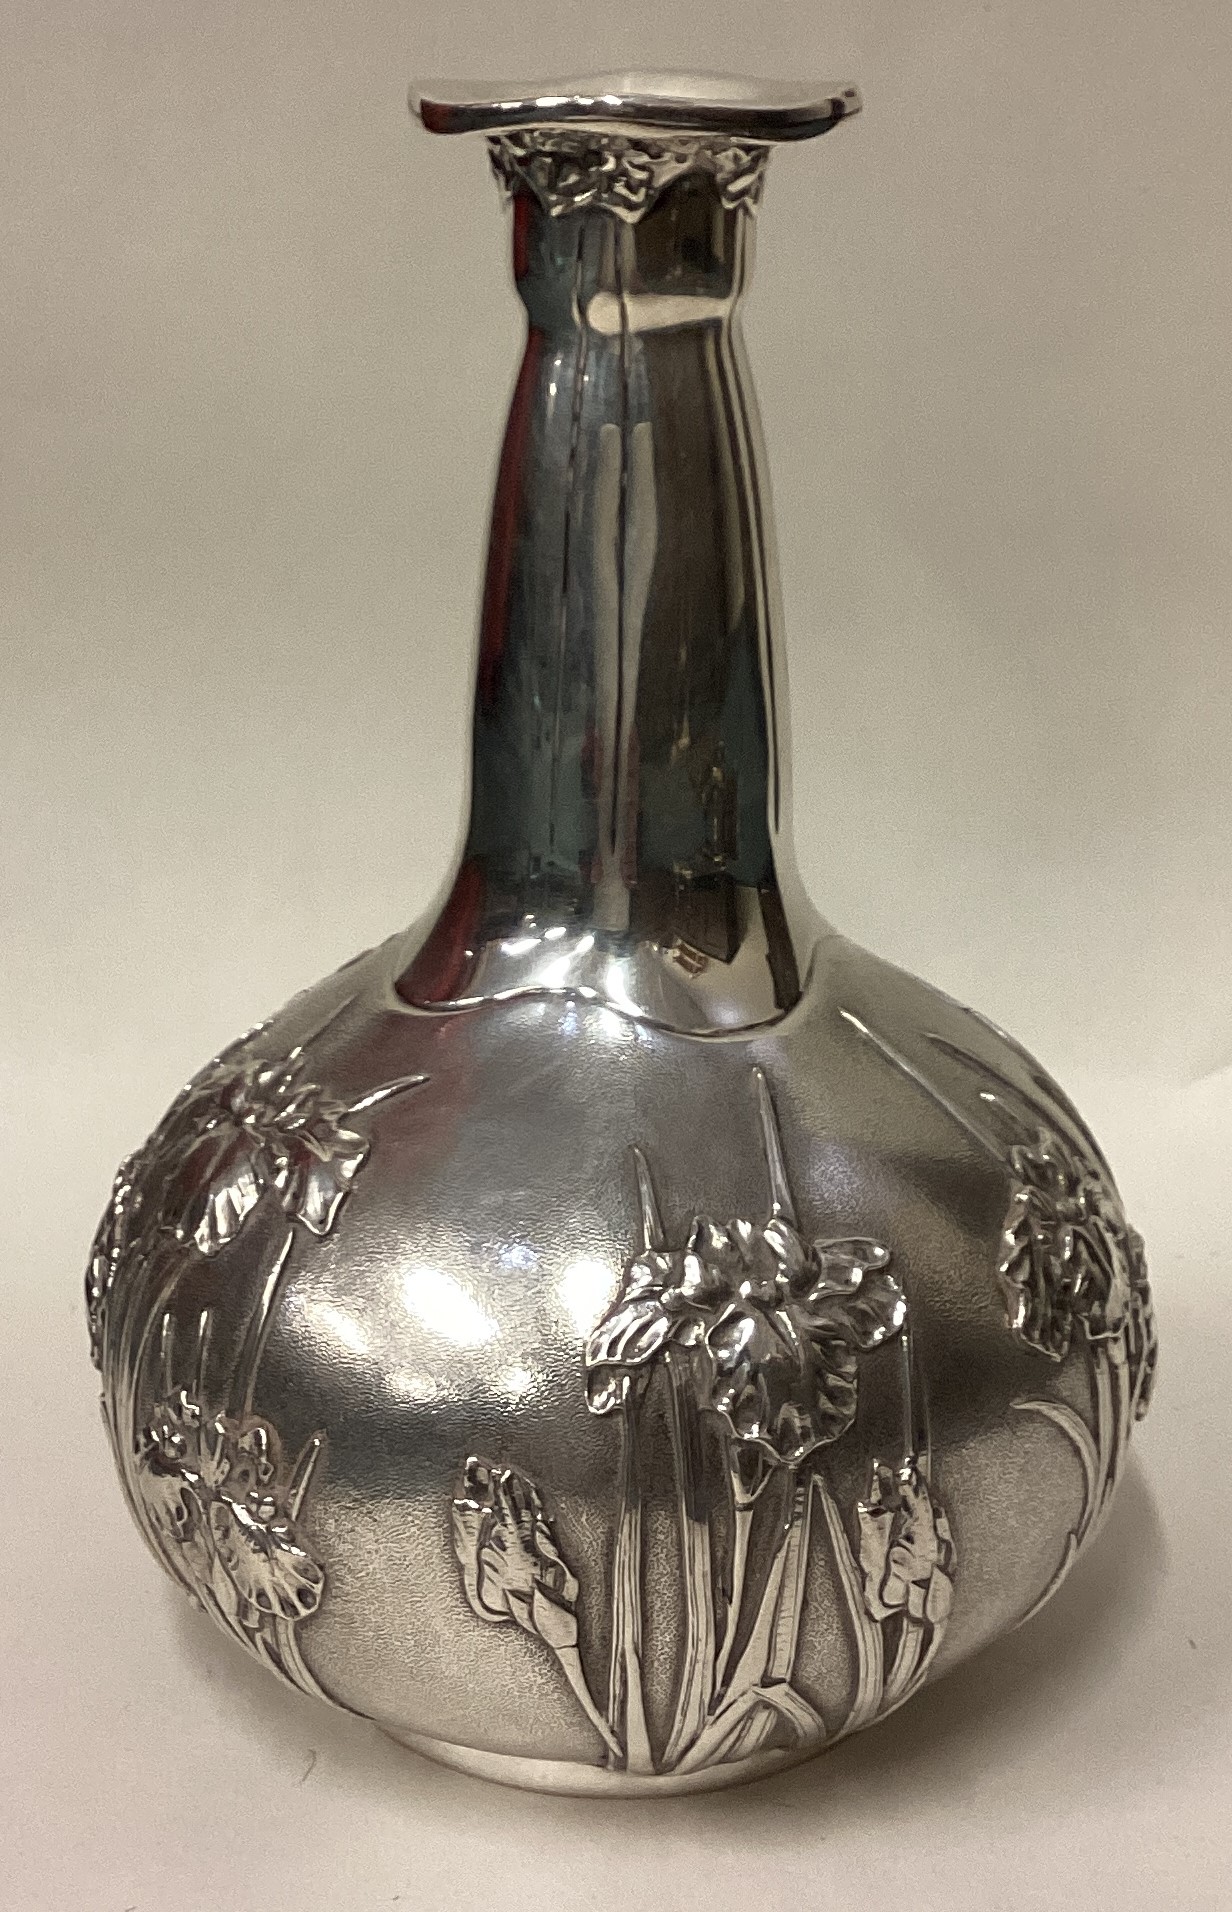 An American silver vase in the Japanese style embossed with chrysanthemum decoration.